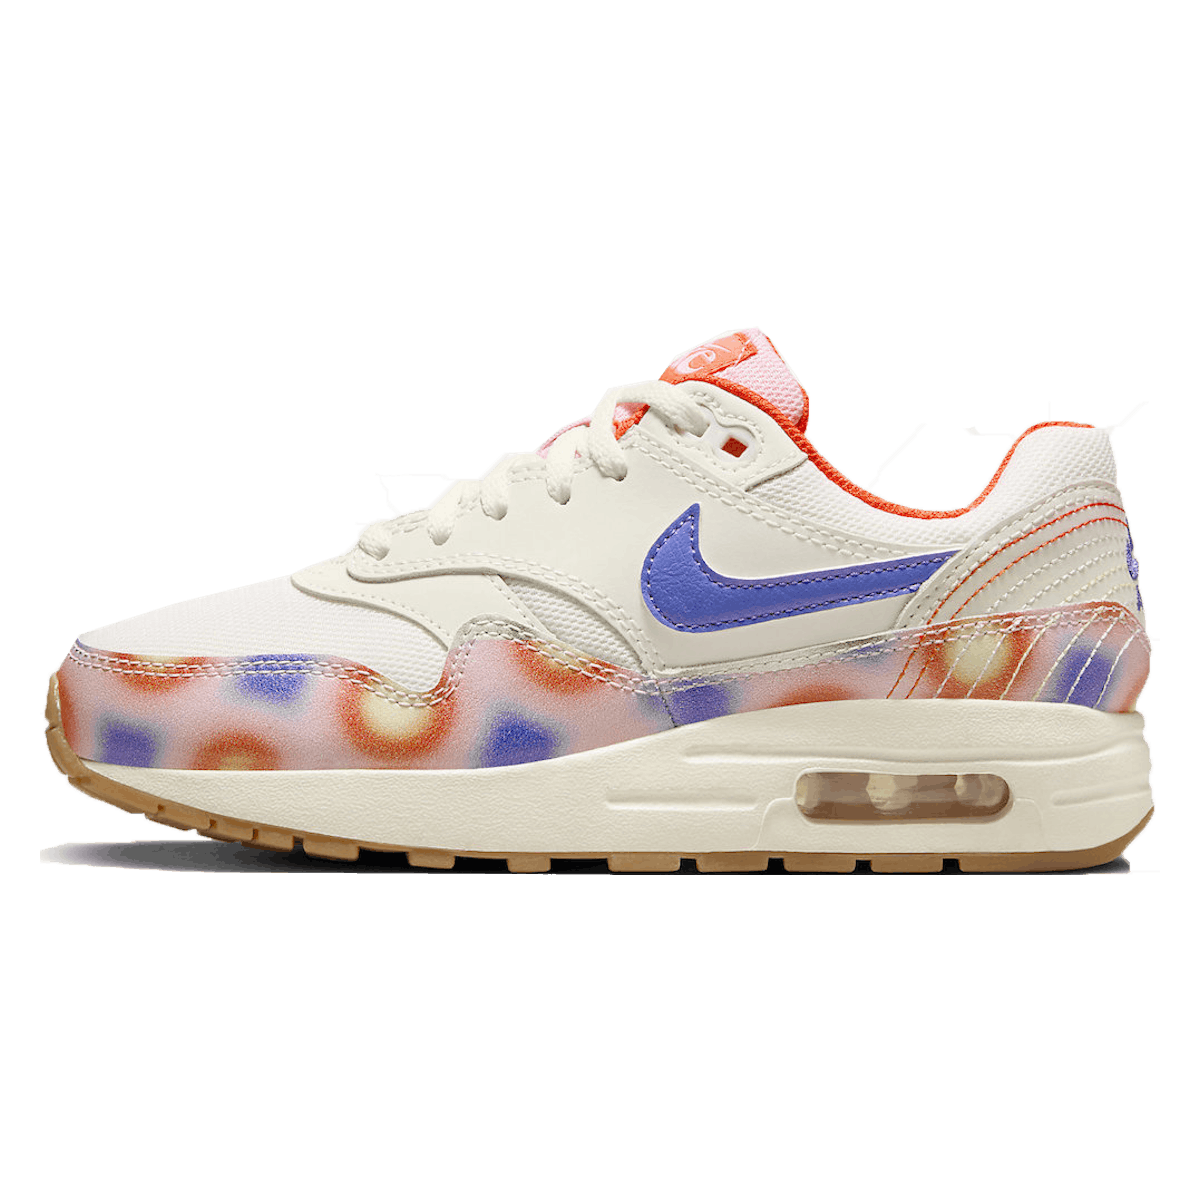 Nike Air Max 1 SE GS "Everything You Need"